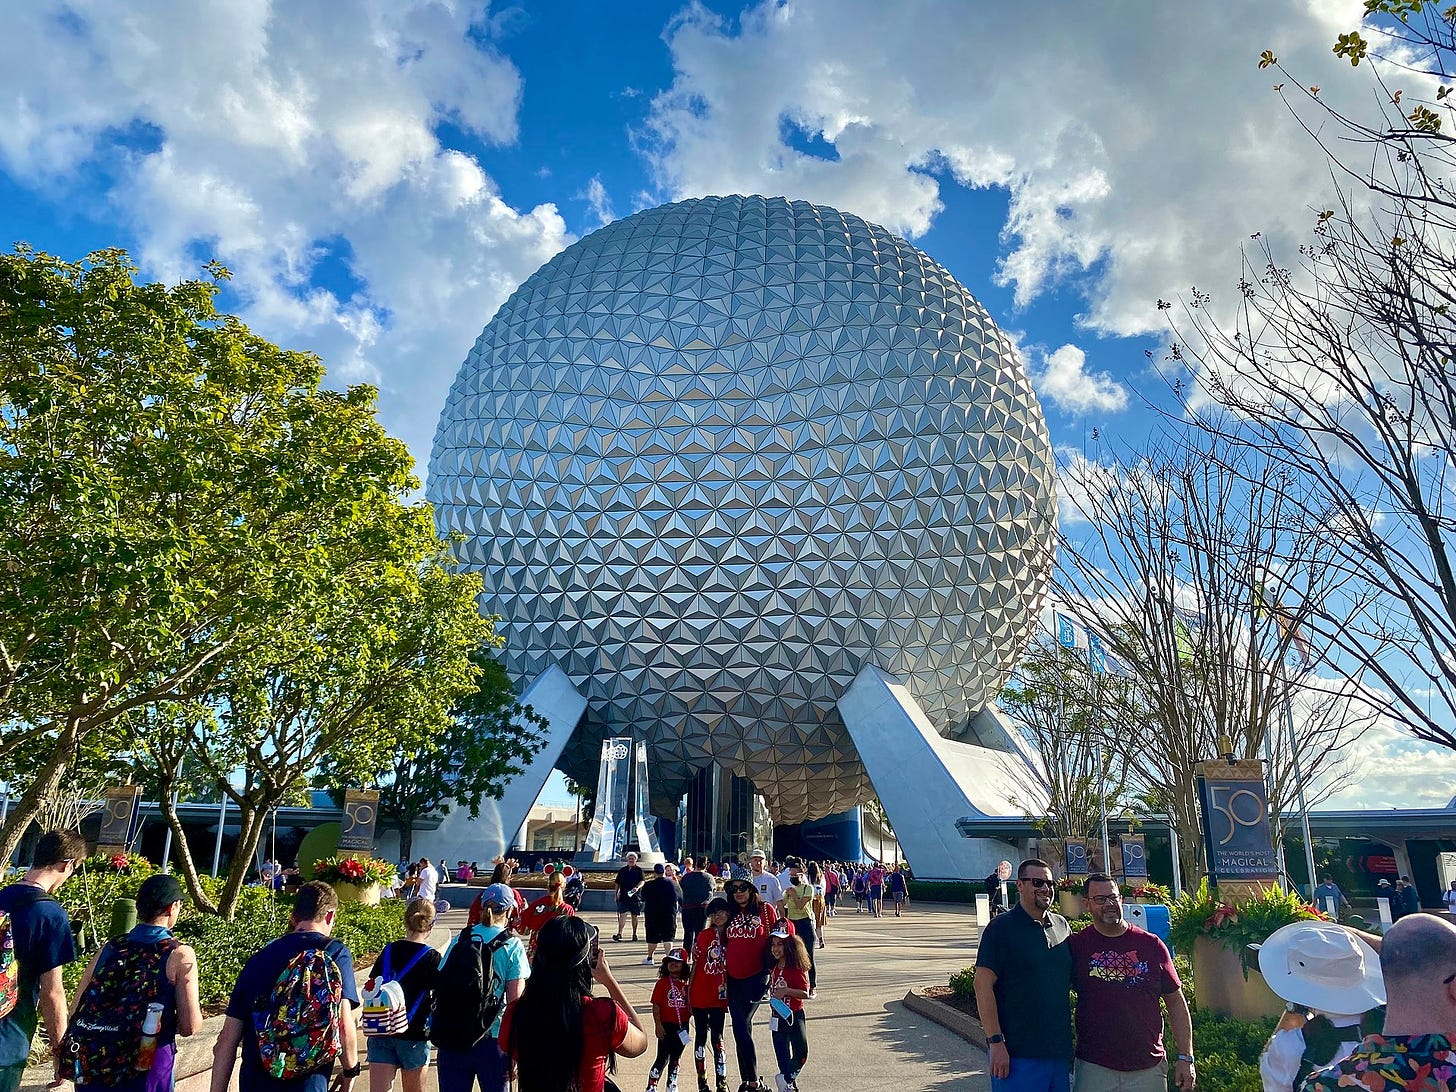 Spaceship Earth and entry plaza 2021.jpg